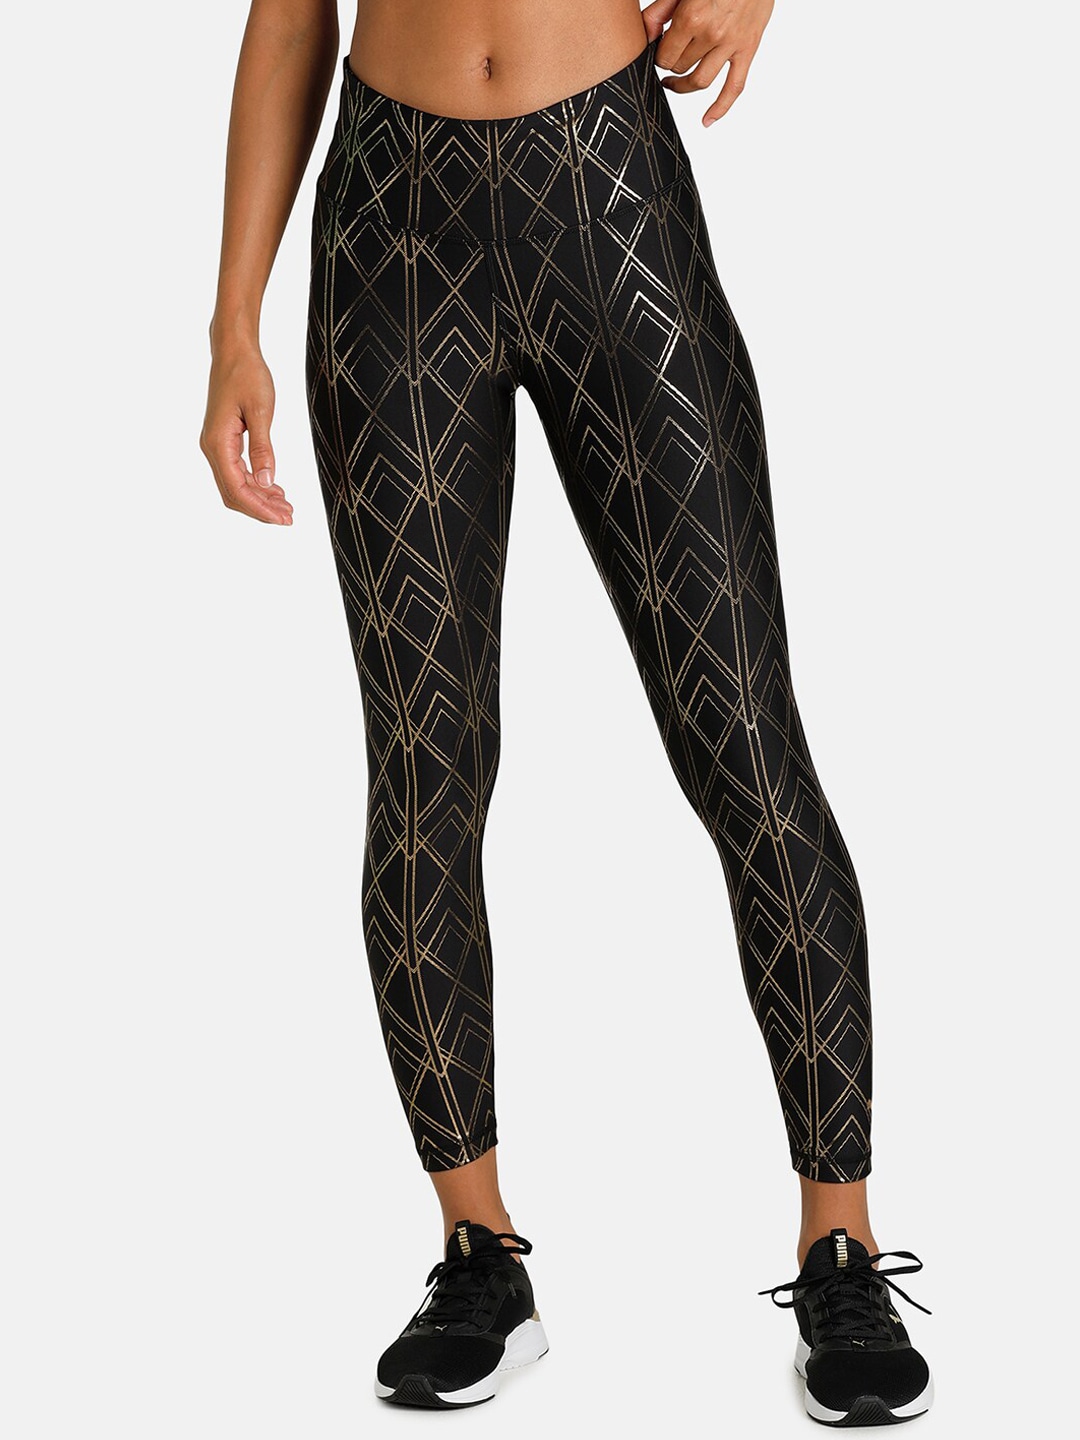 Puma Women Black Patterned Deco Glam High Waist 7/8 Tights Price in India